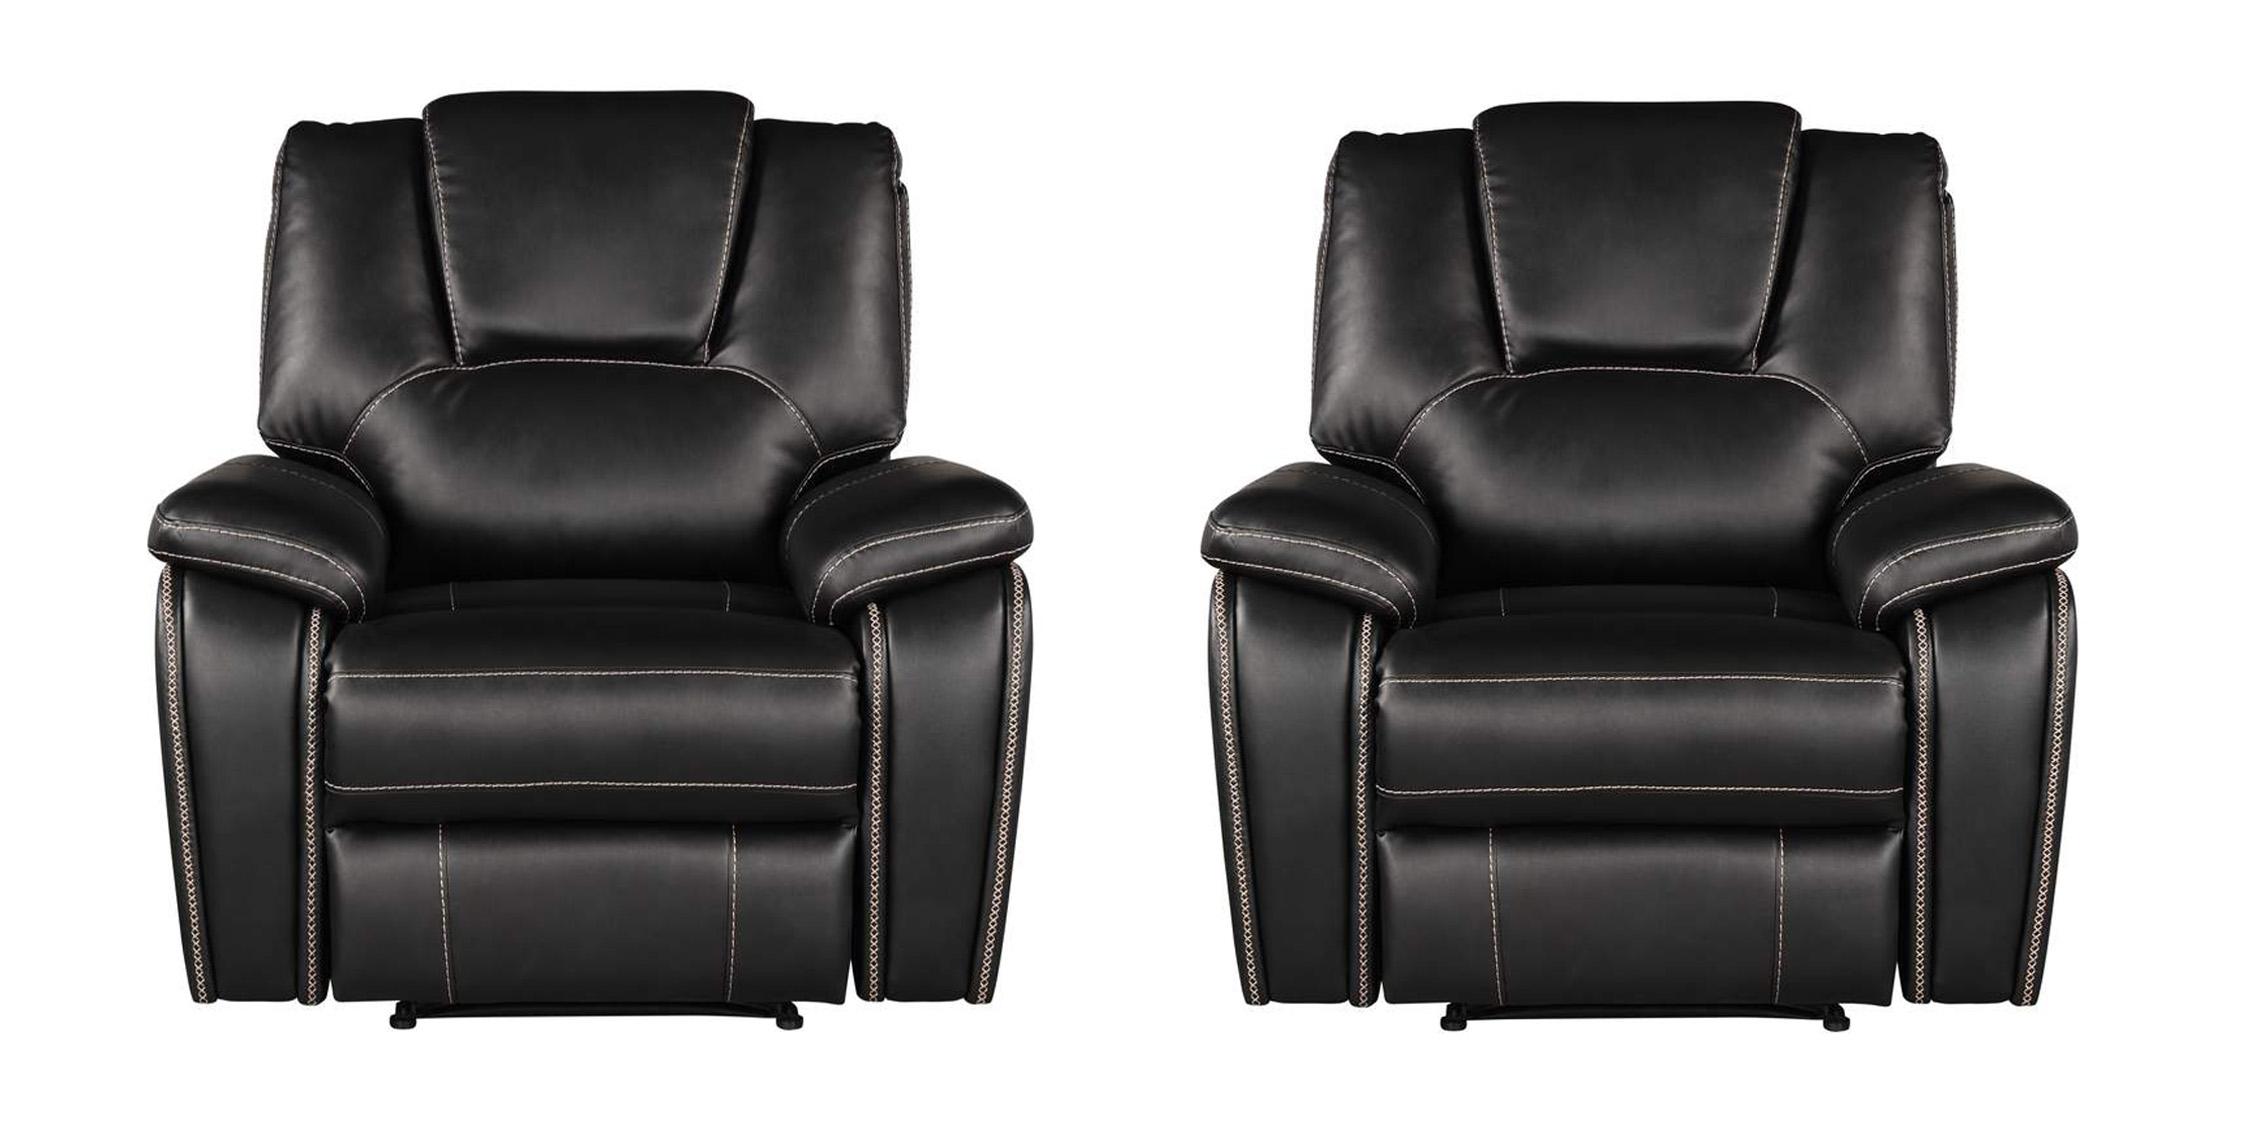 Contemporary, Modern Recline Chair Set HONG KONG 733569330805-2PC in Black Eco Leather